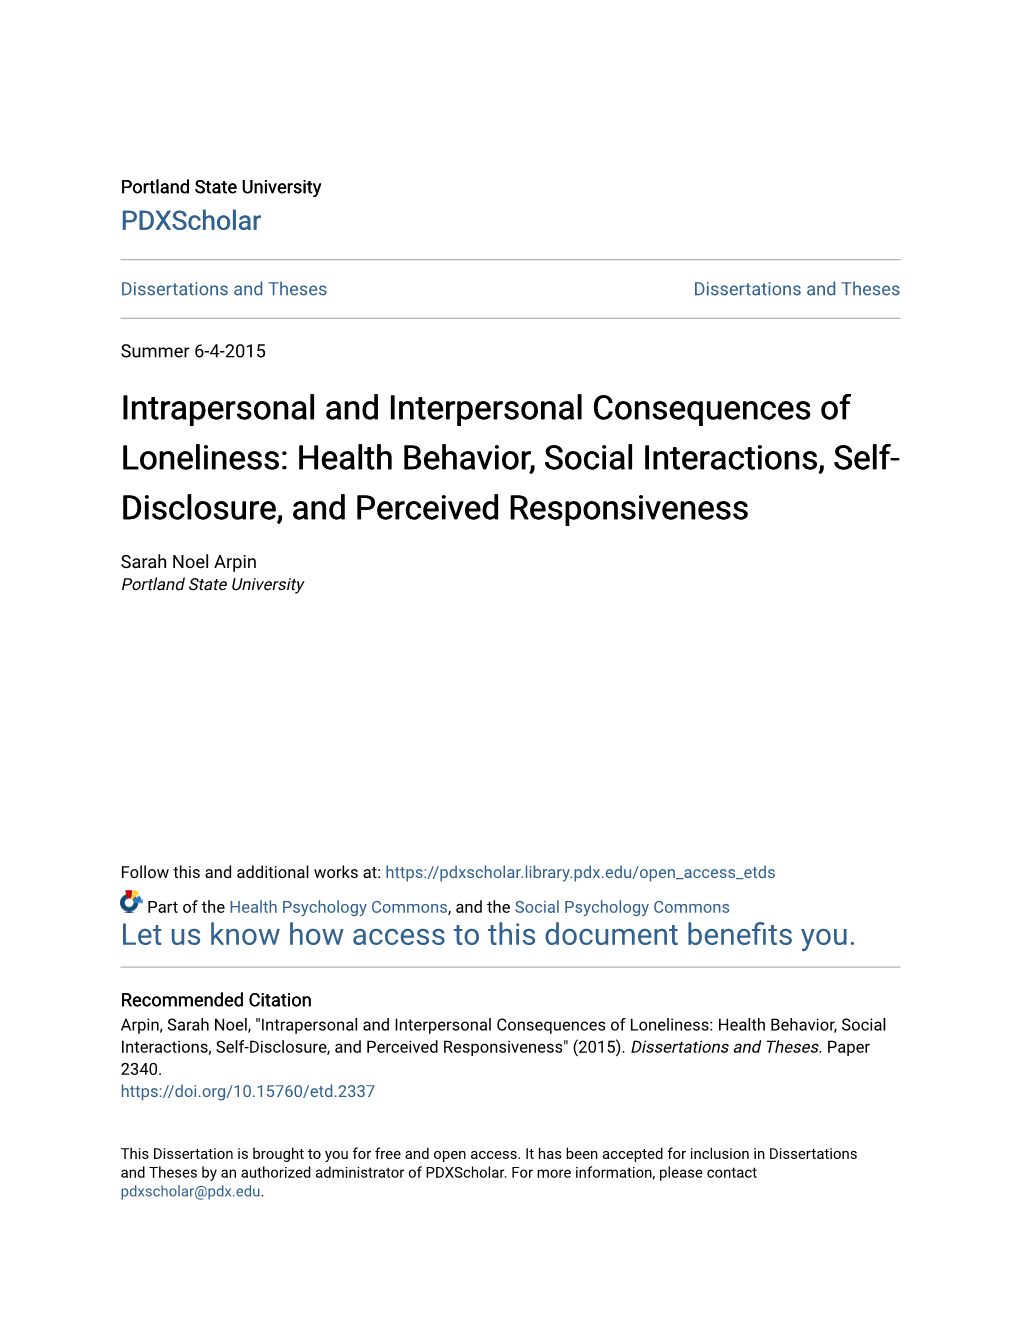 Intrapersonal and Interpersonal Consequences of Loneliness: Health Behavior, Social Interactions, Self- Disclosure, and Perceived Responsiveness